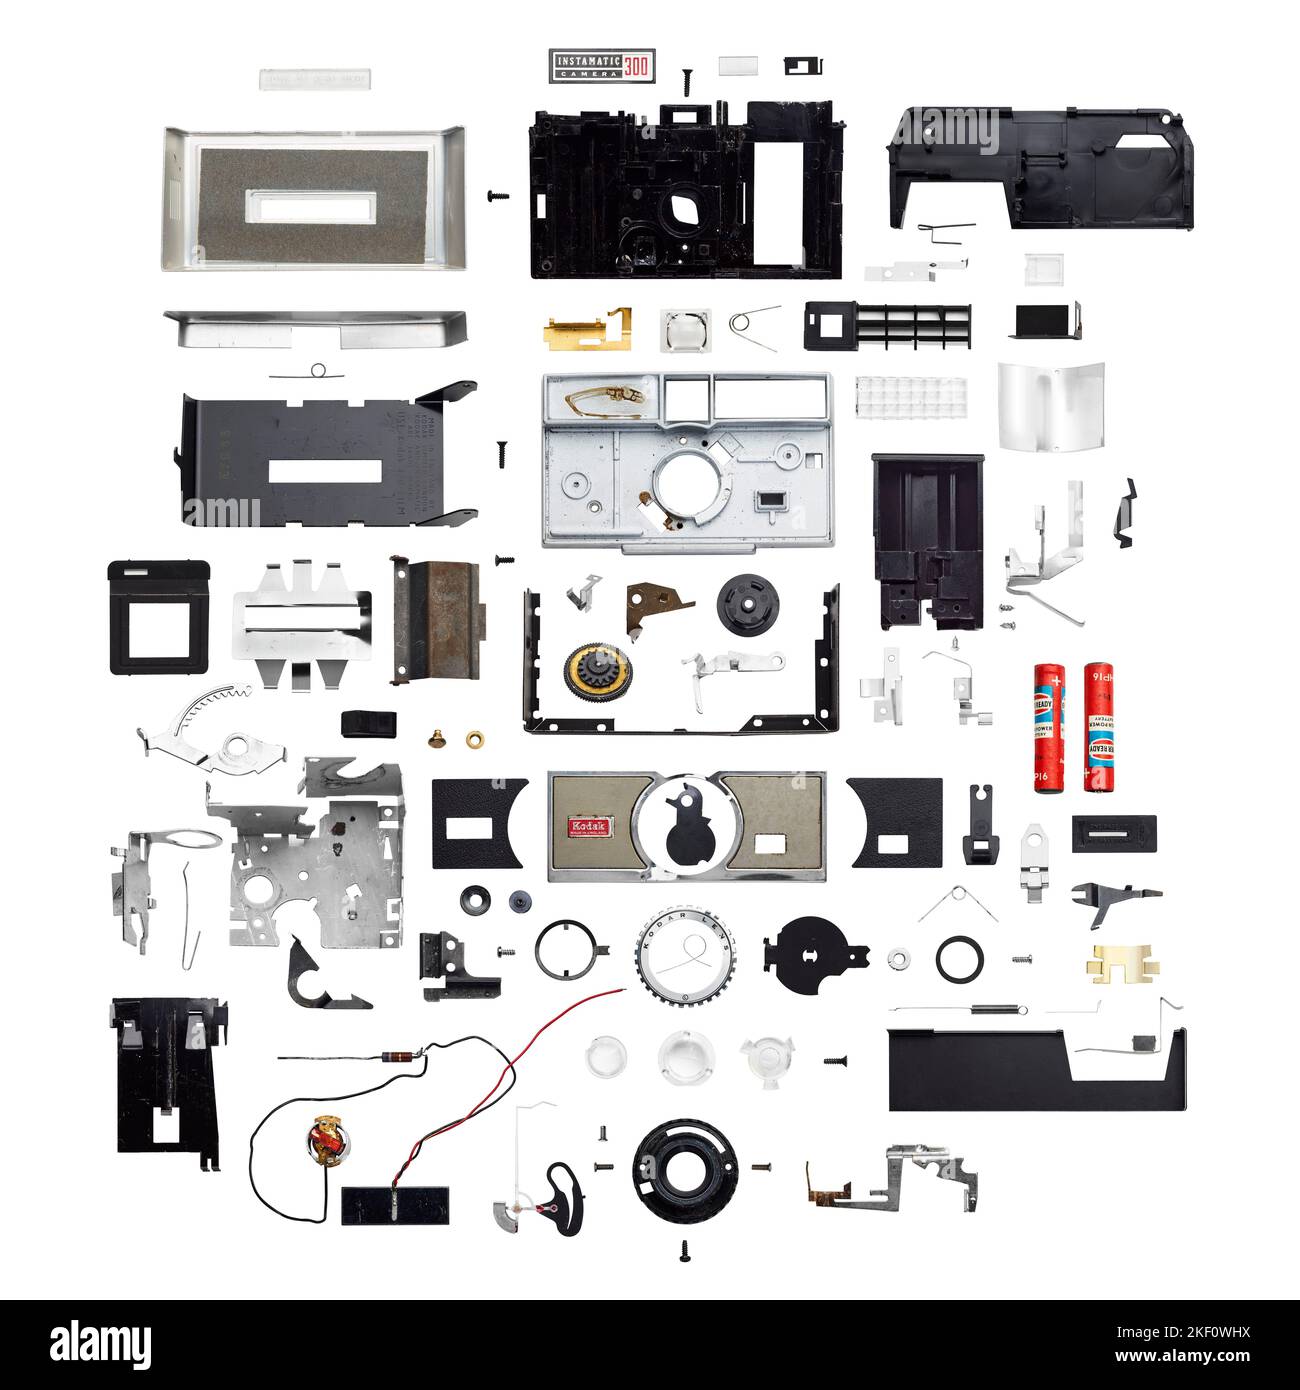 Instamatic 300 camera shown in pieces on a white background Stock Photo